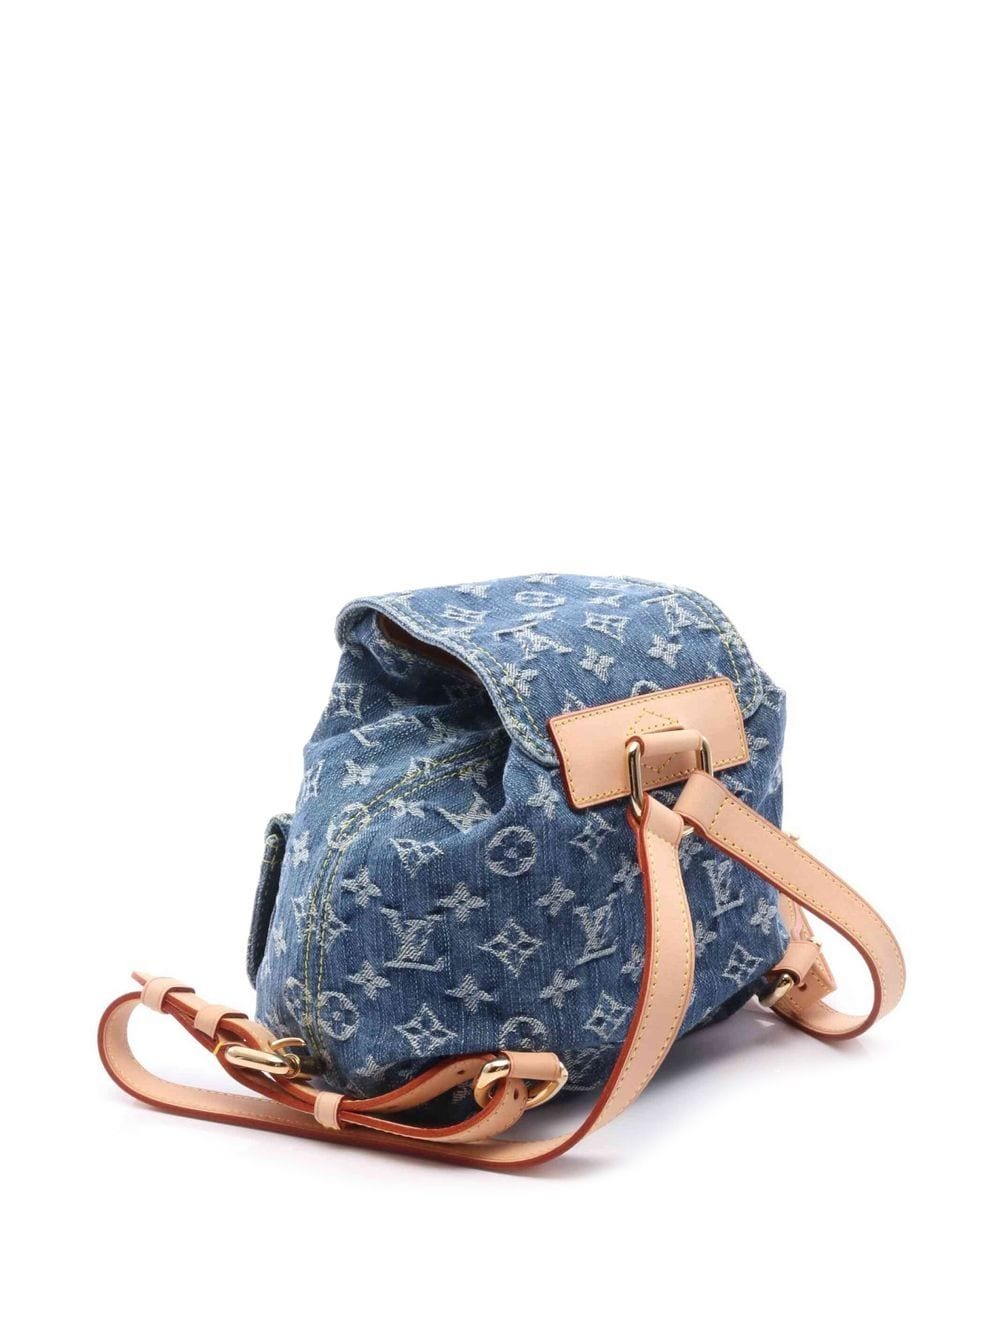 Louis Vuitton 2006 pre-owned Sac a Dos PM Backpack - Farfetch